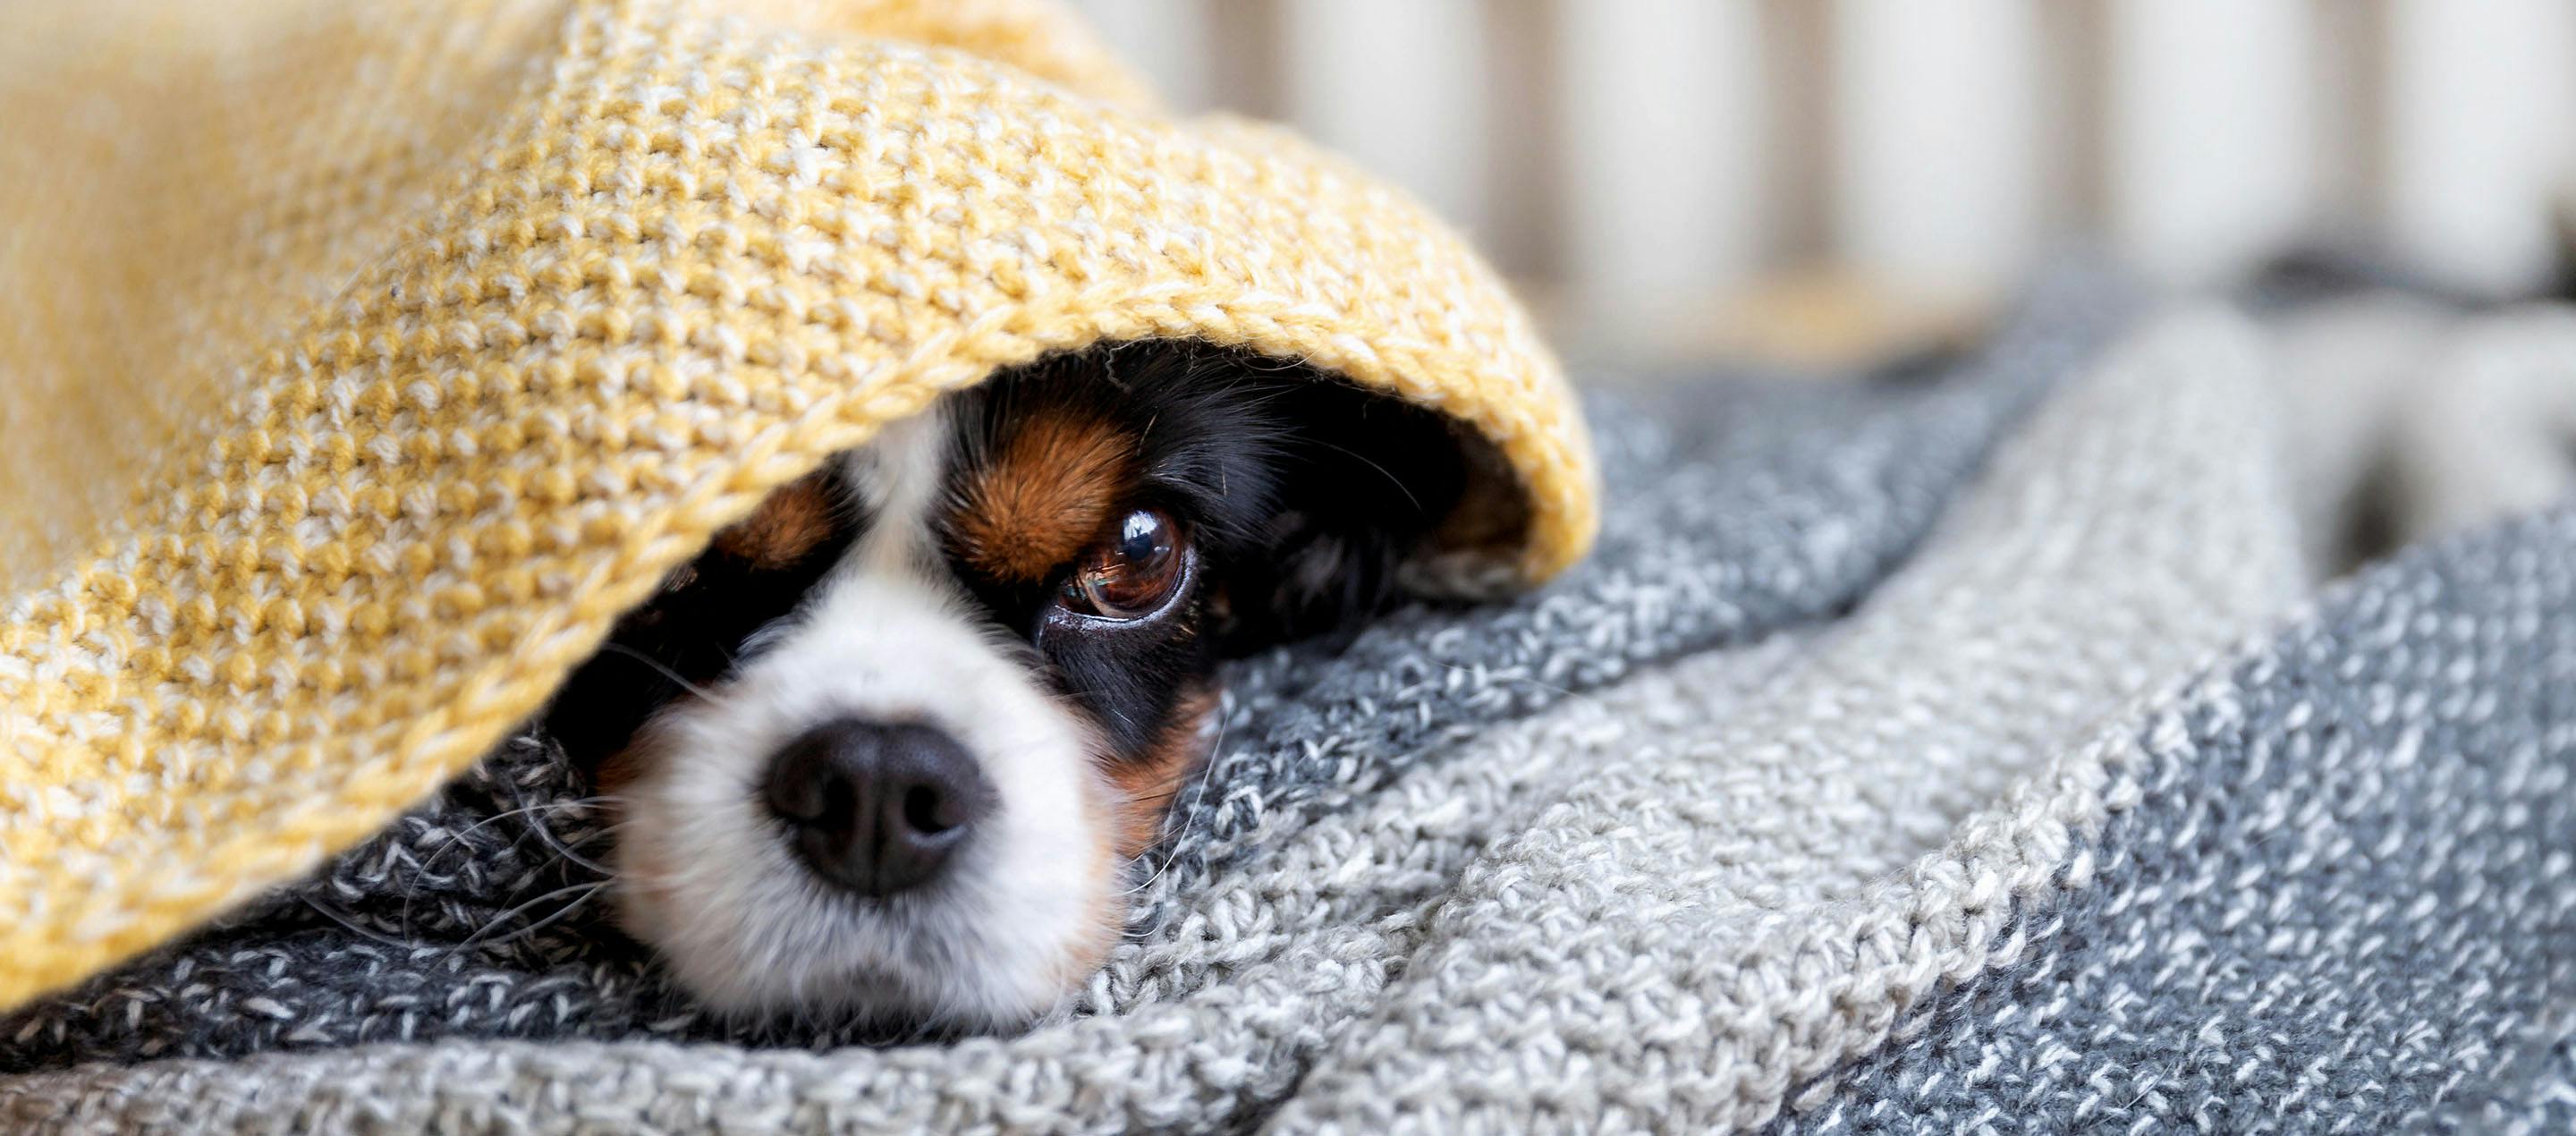 Supporting Local Businesses with Your Furry Friend: How to Shop Local with Your Pet this Season